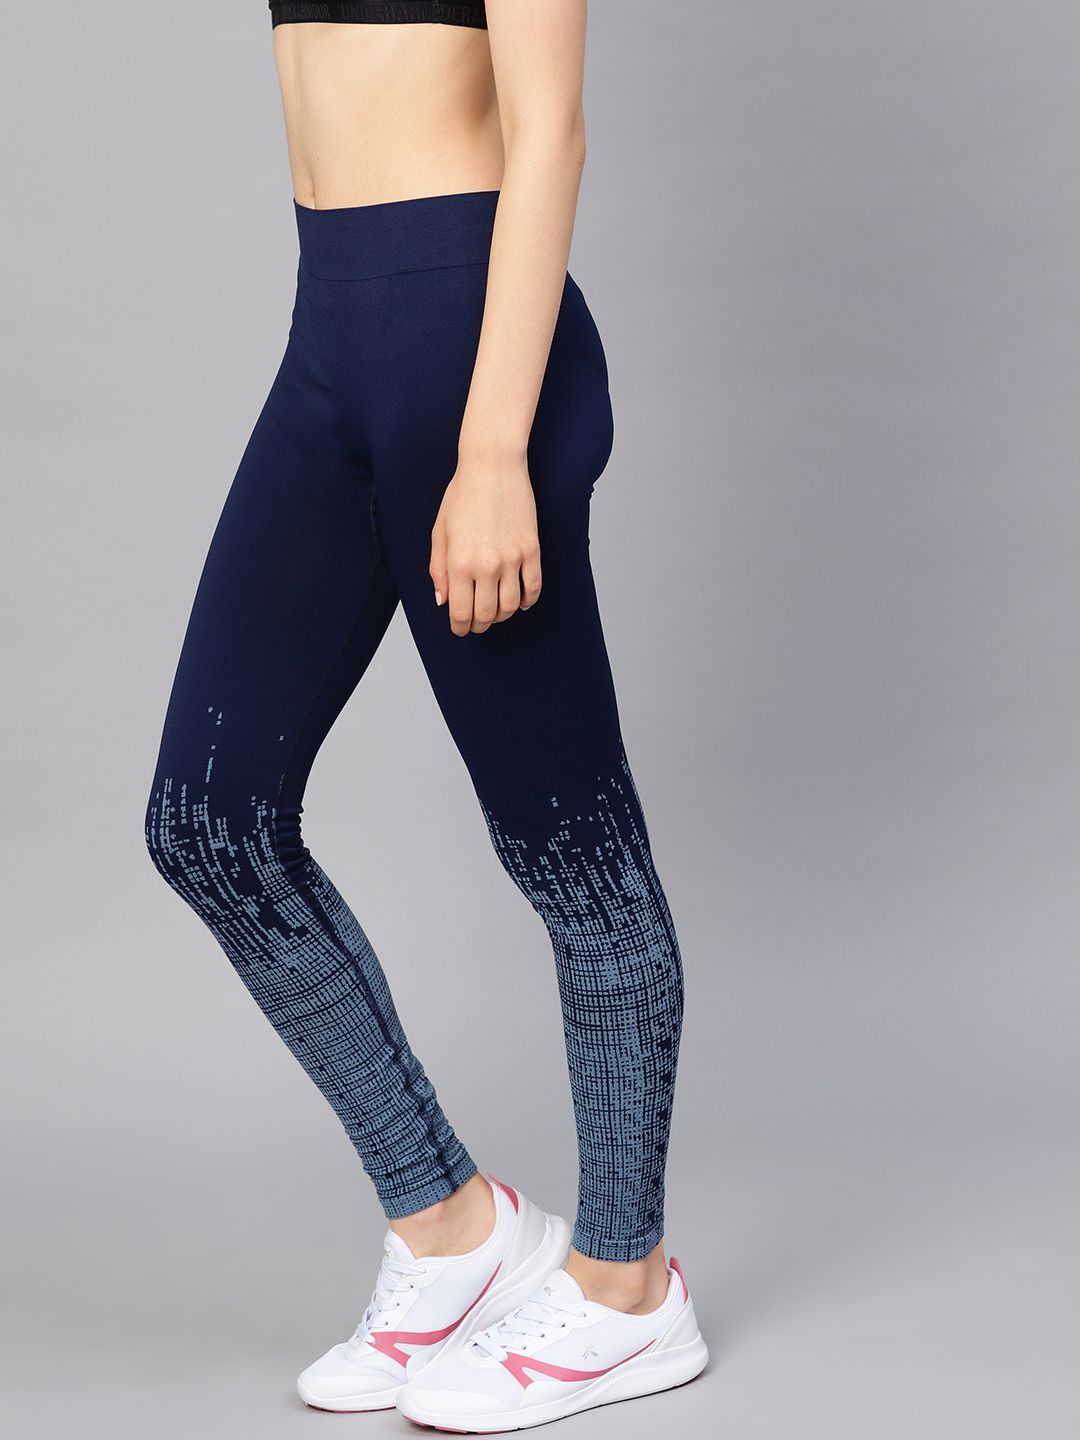 HRX by Hrithik Roshan Women Blue Printed Rapid Dry Seamless Running Tights Price in India